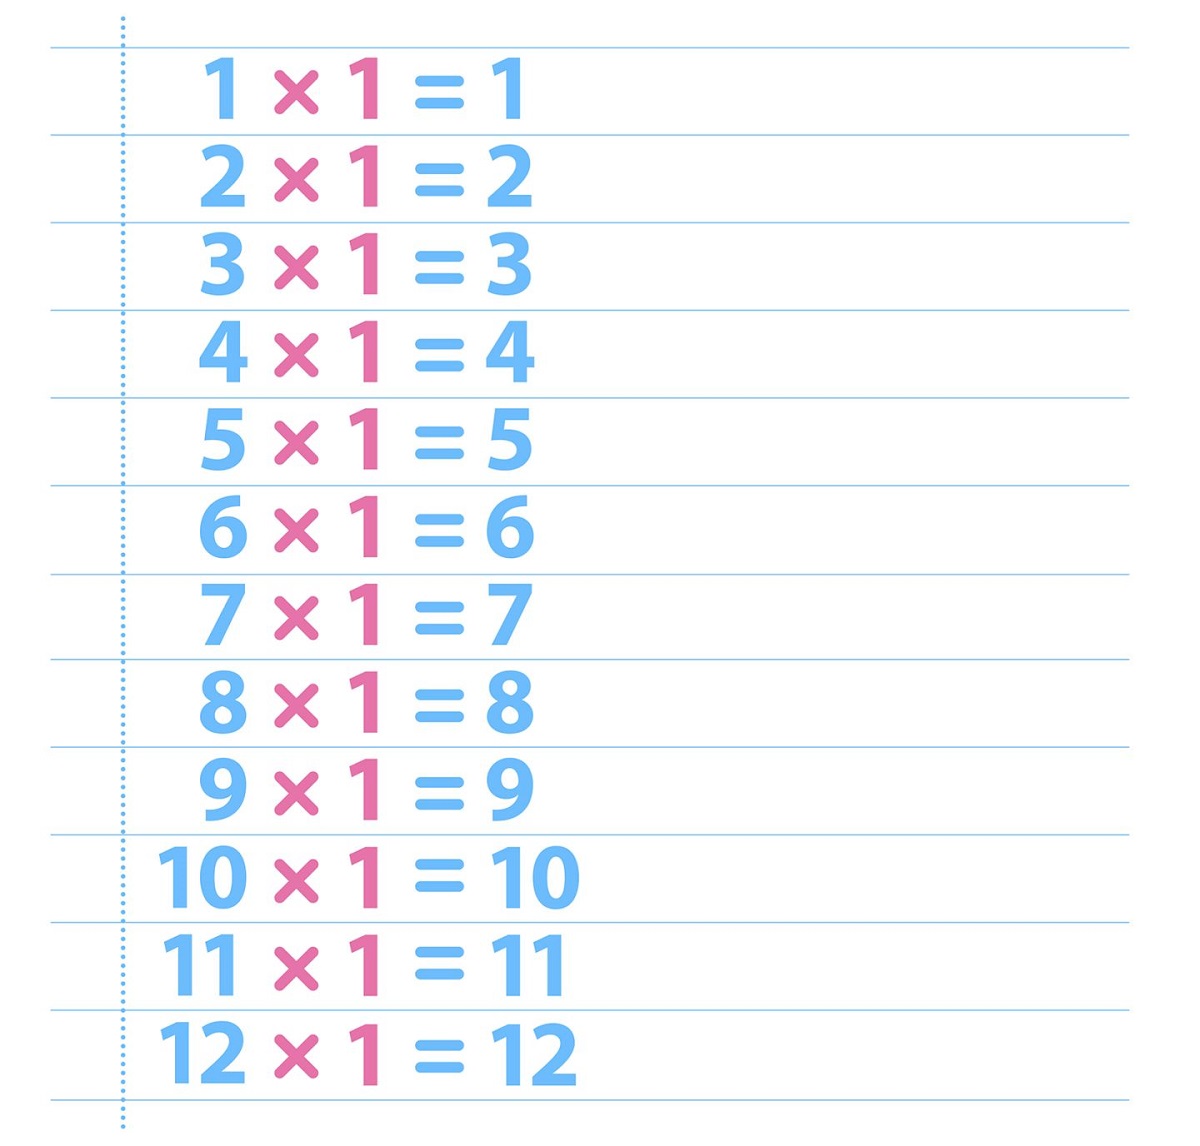 1 times tables colorful